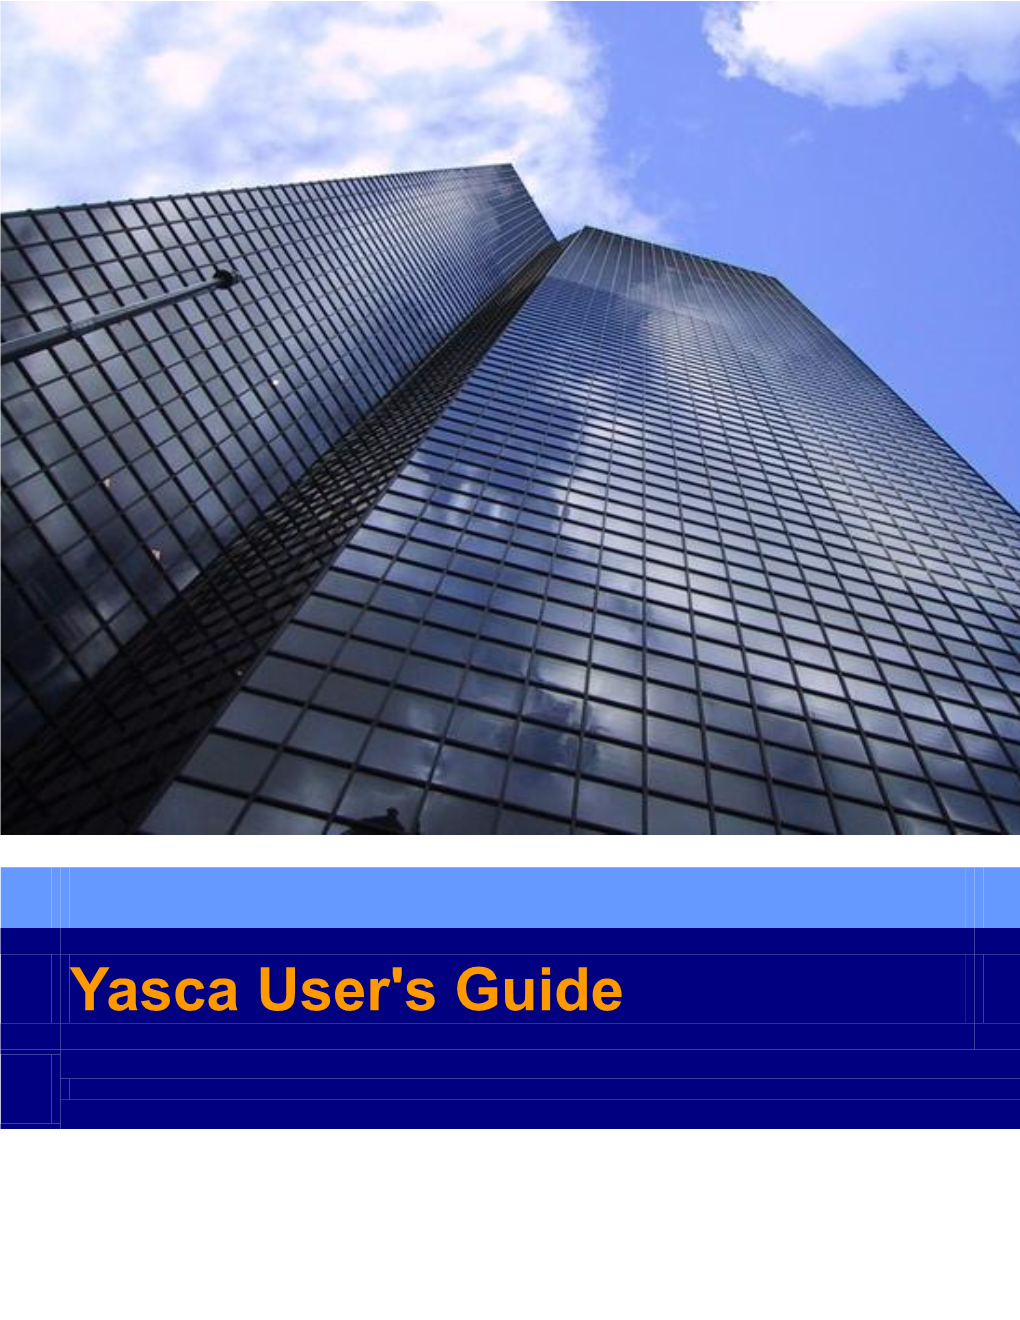 Yasca User's Guide